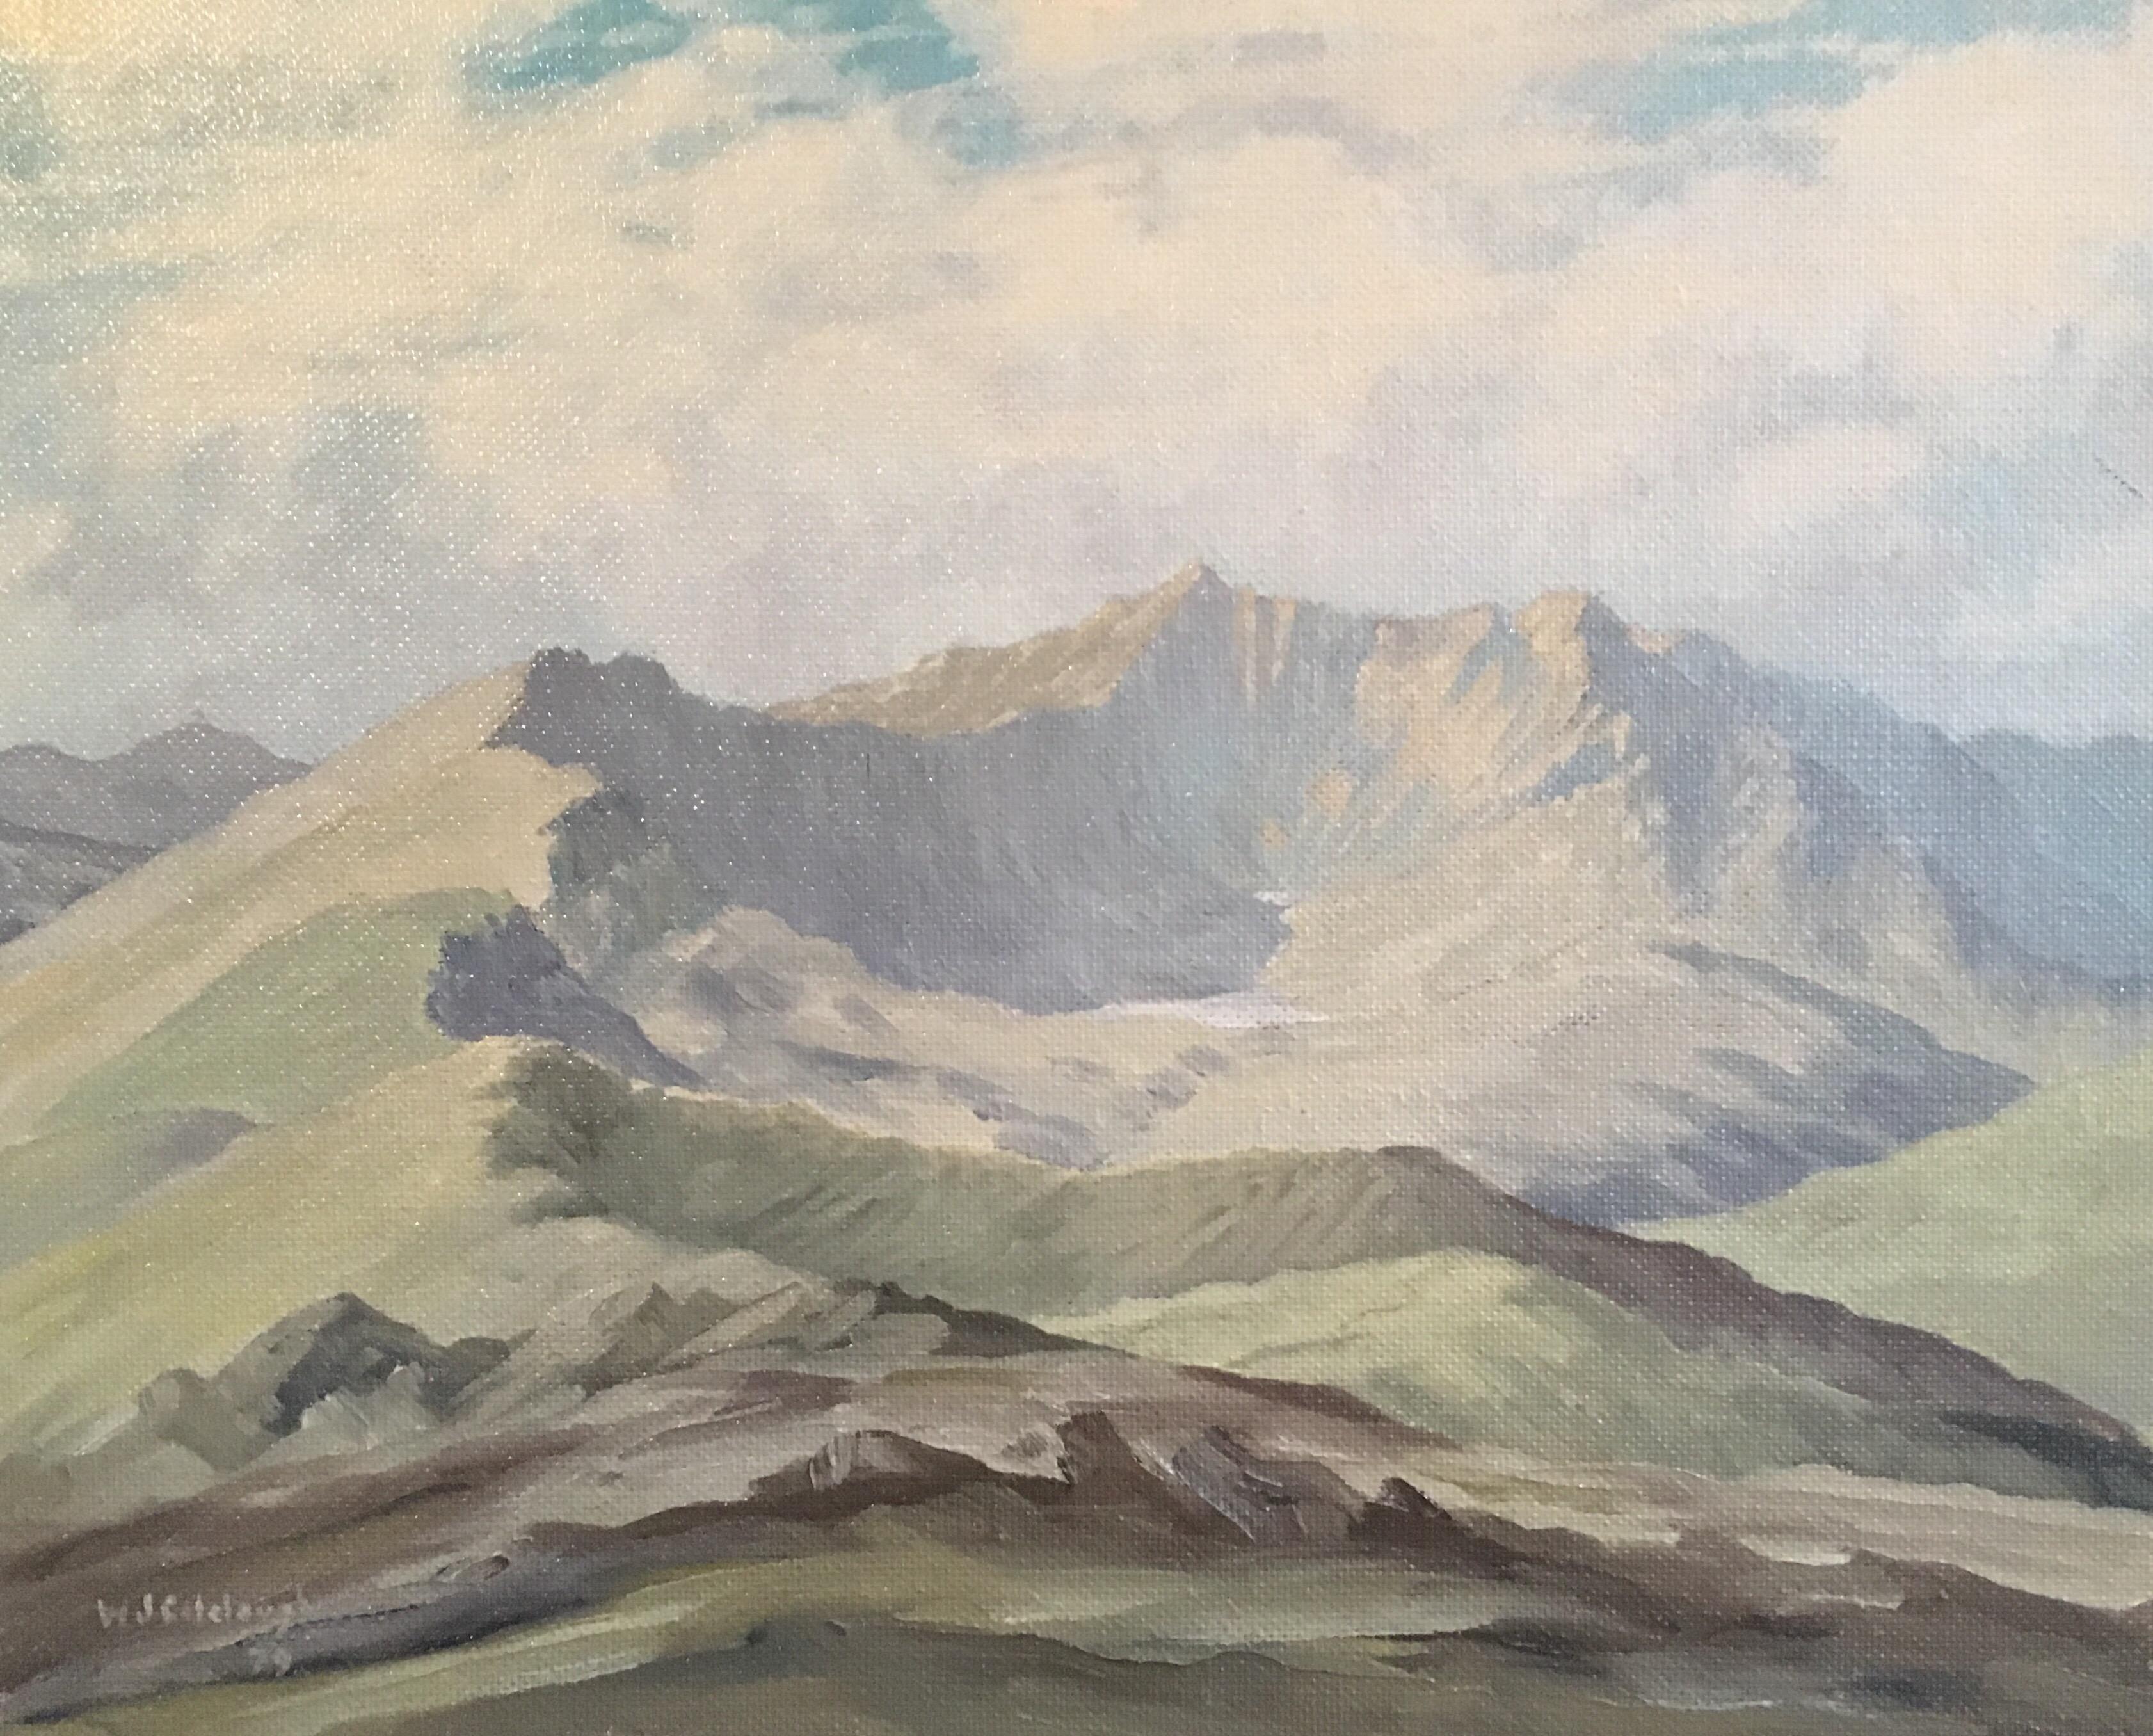 Wilfred J.Colclough Still-Life Painting - "Snowdon from Siabod", Impressionist Landscape, Original Oil Painting, Signed